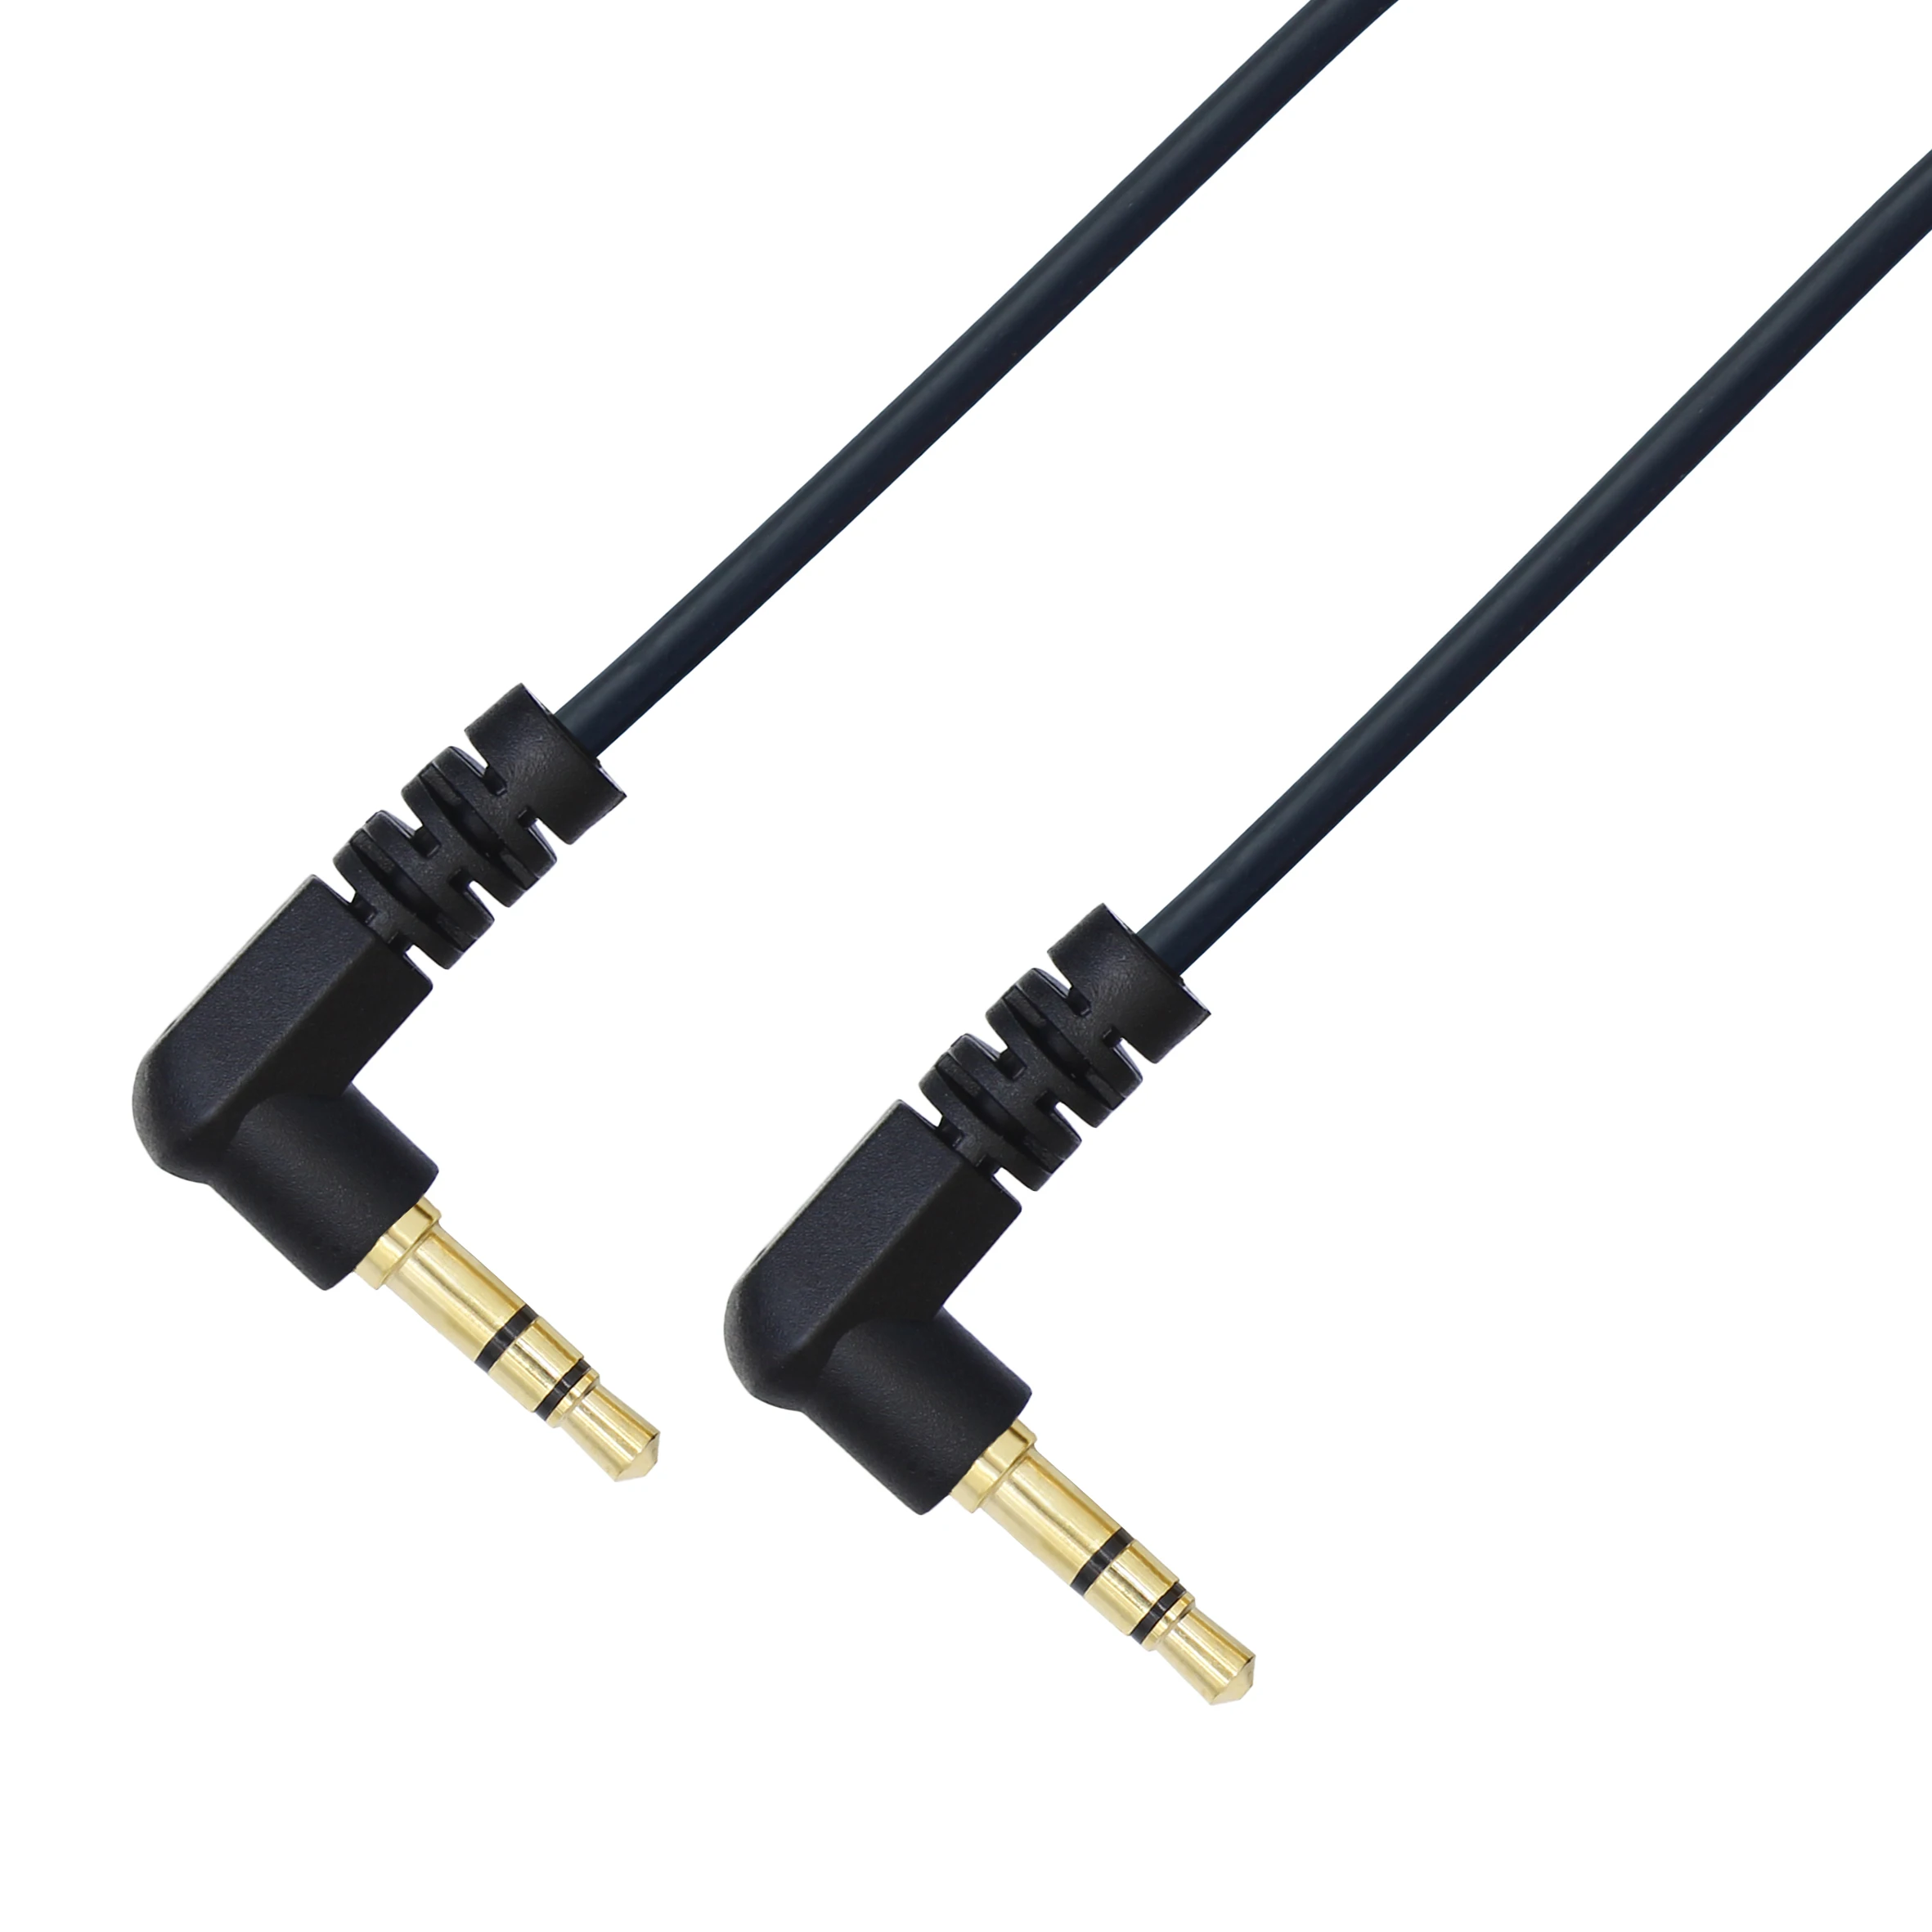 1M 2M 3.5mm Male to Male Stero Audio Cable 90 Degree Angled 3 Pole Car AUX MP3/MP4 Audio Cable